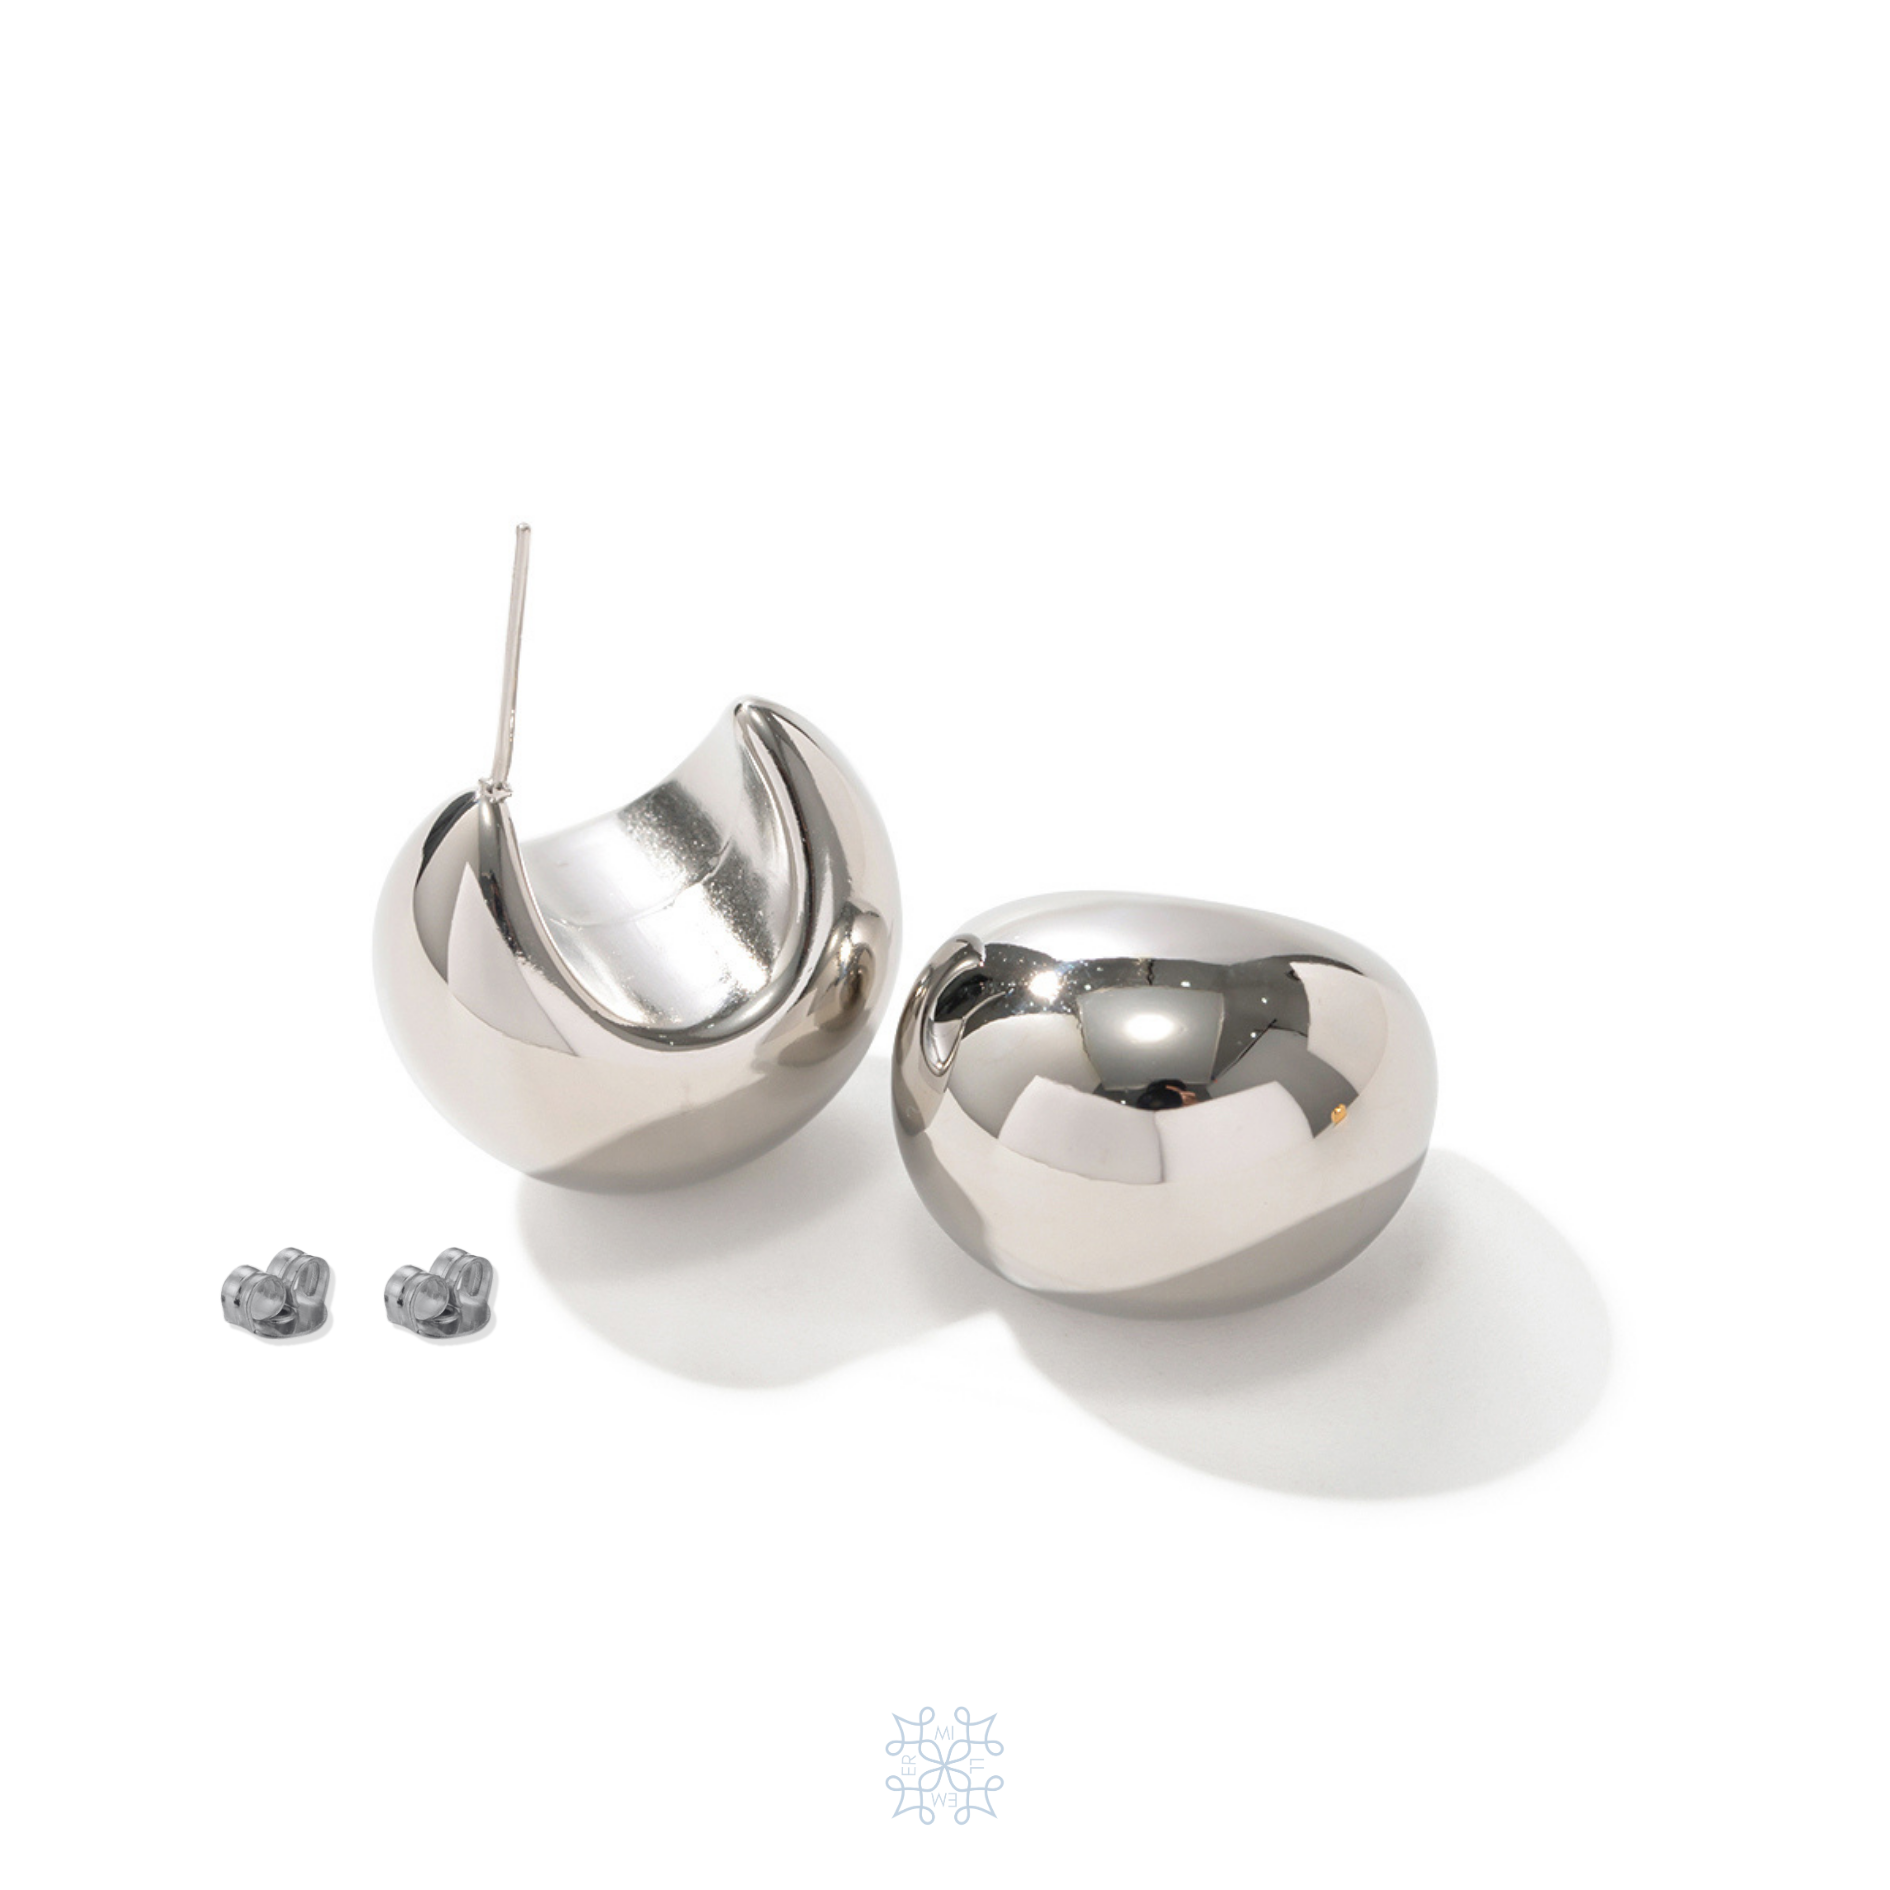 DROPLET Silver Pebble Earrings. Chunky water drop shape in shiny silver surface.